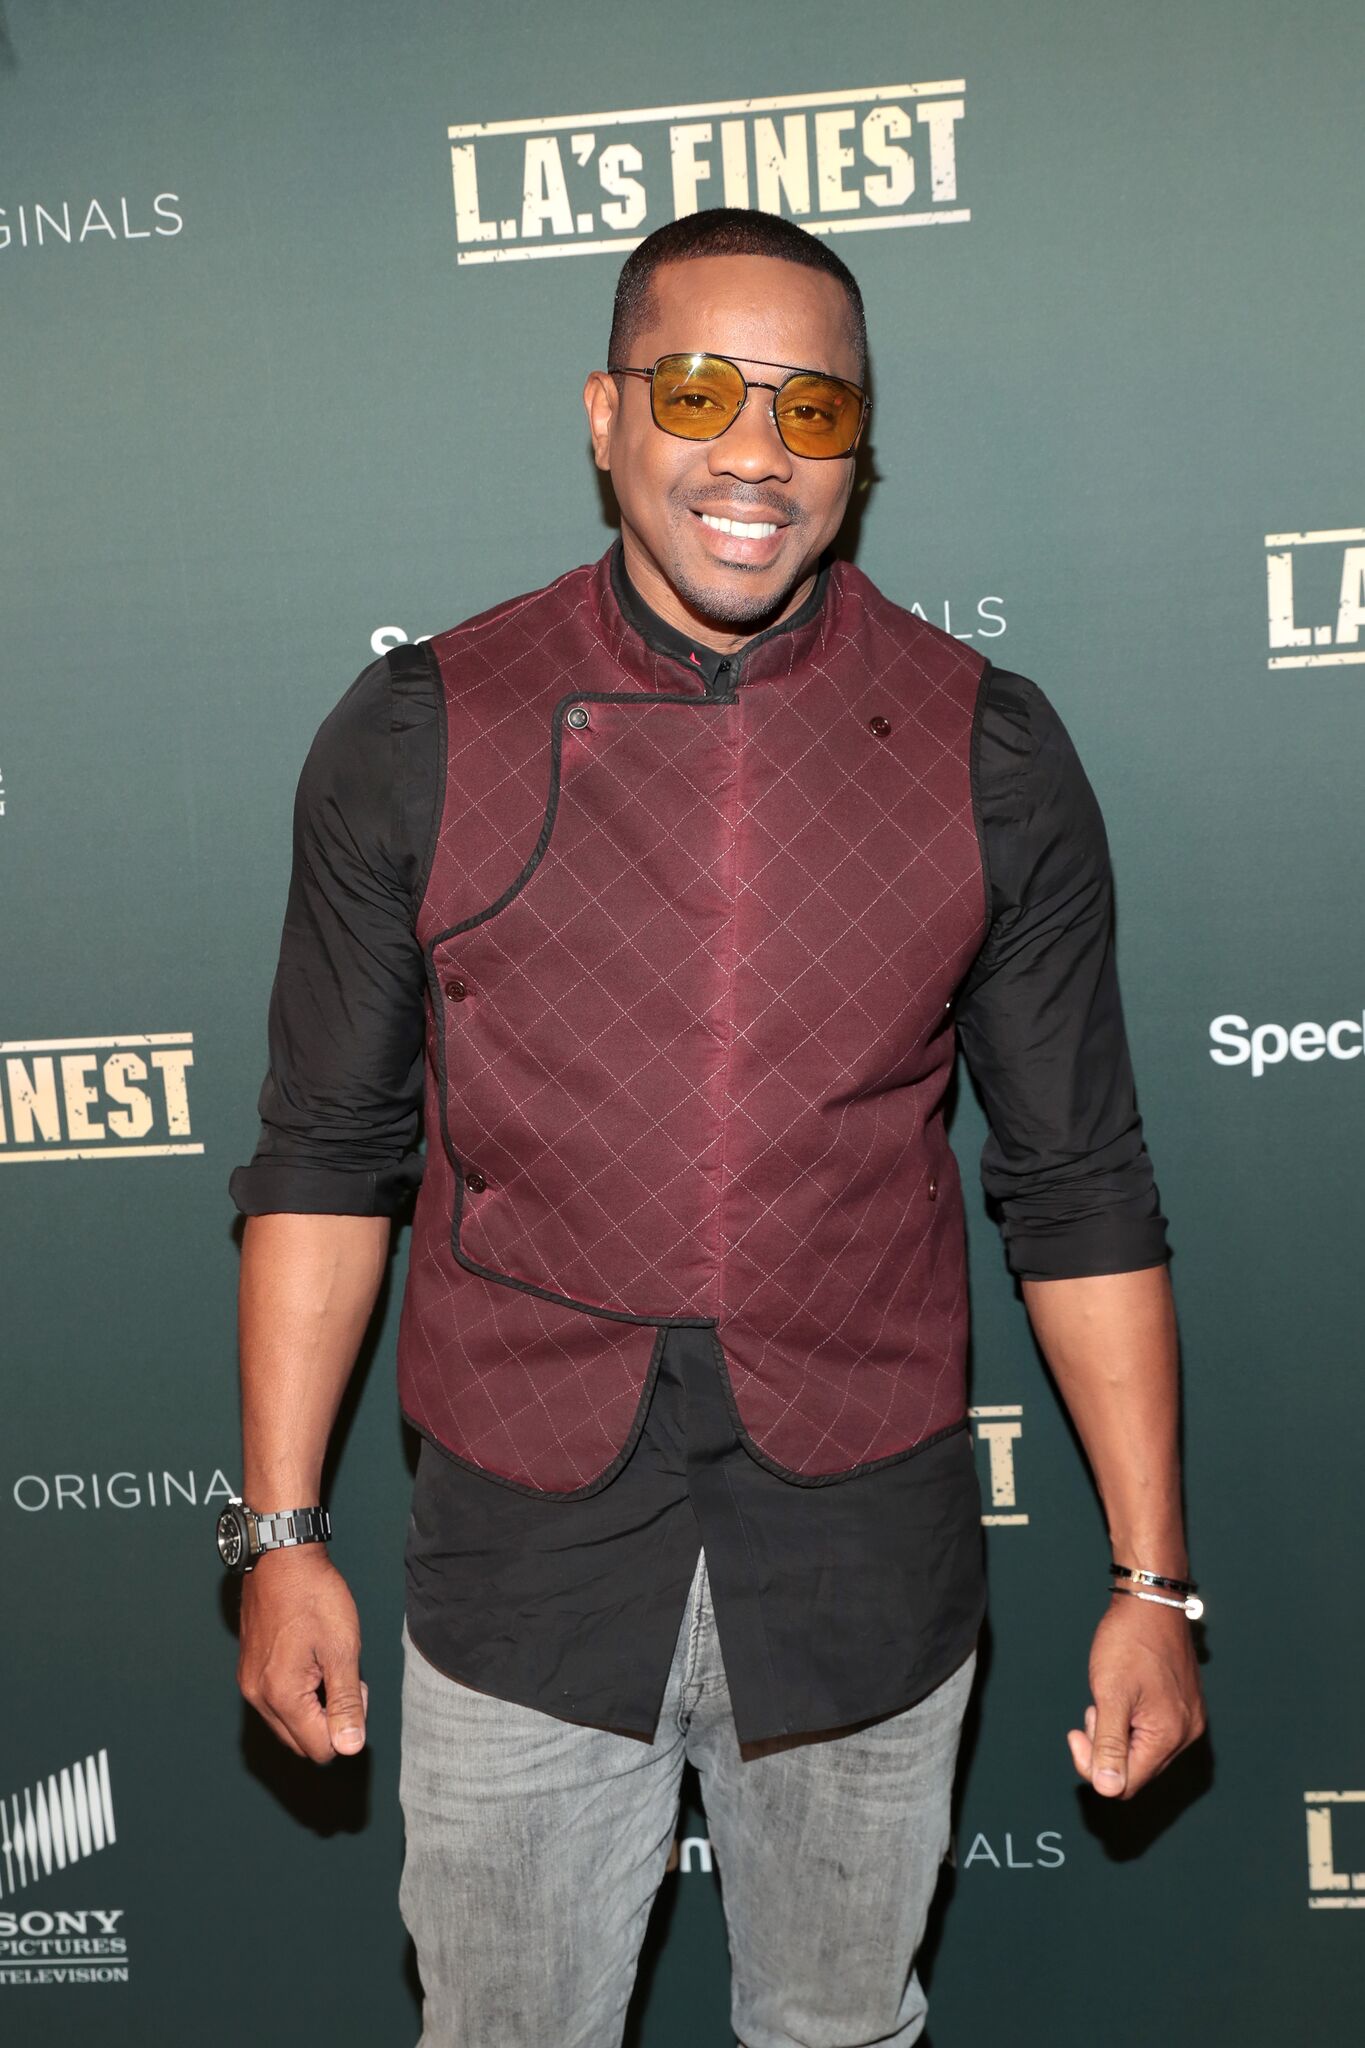 Duane Martin attends Spectrum Originals and Sony Pictures Television Premiere Party for "L.A.'s Finest" at Sunset Tower on May 10, 2019 | Photo: Getty Images